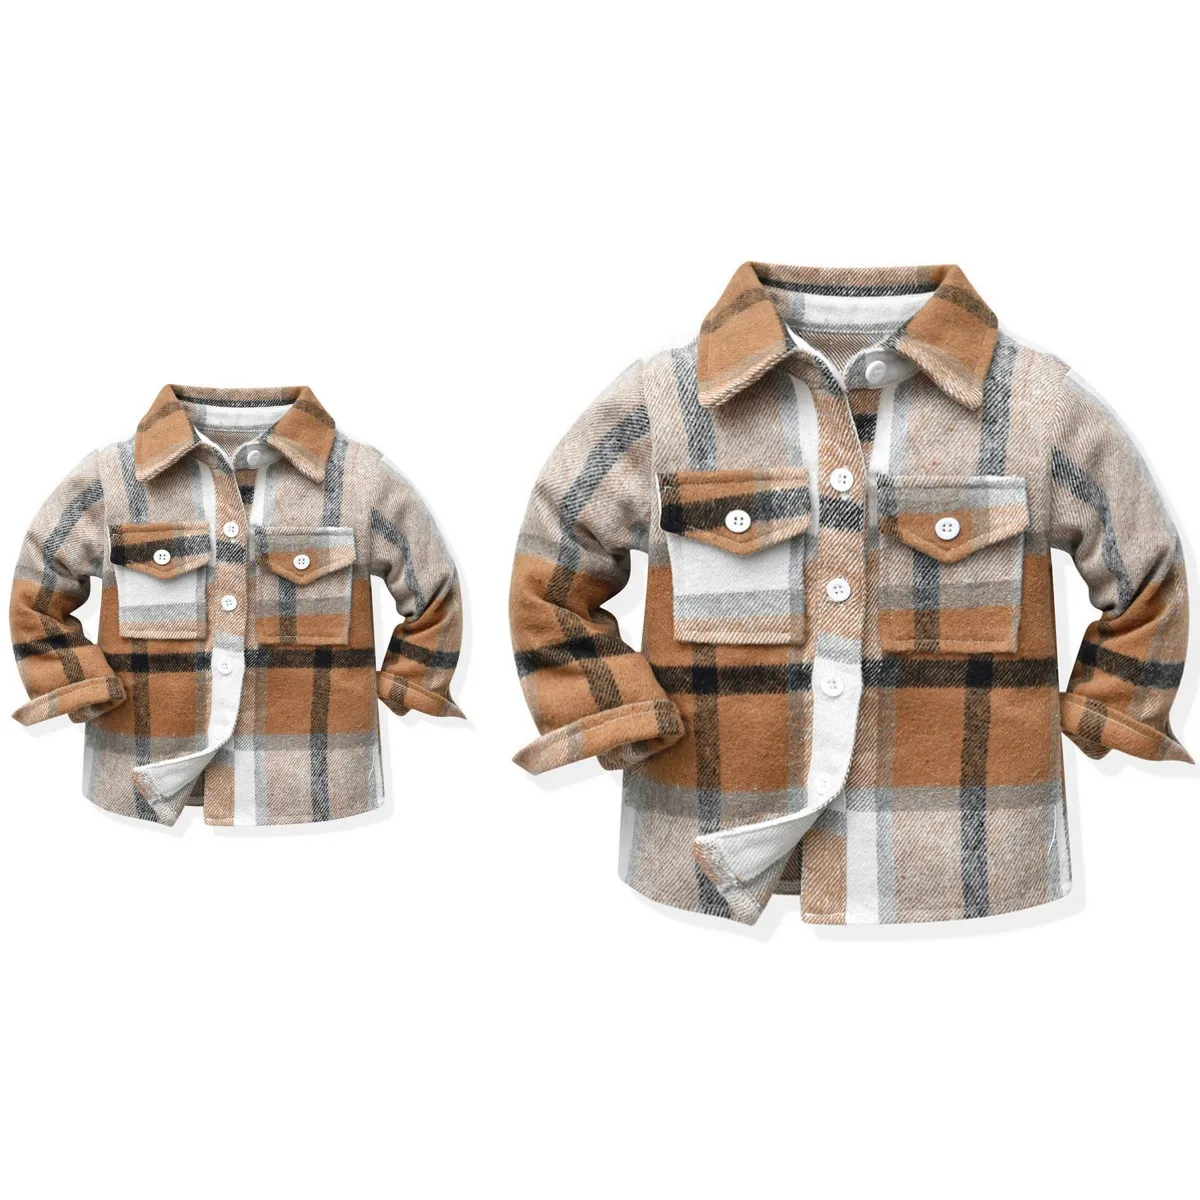 Children's Clothing Autumn Mustard Family Matching Plaid Jacket Long Shirts Christmas Mom Dad and Me Boys GIrls Outwear Coat Woman Sisters Brothers